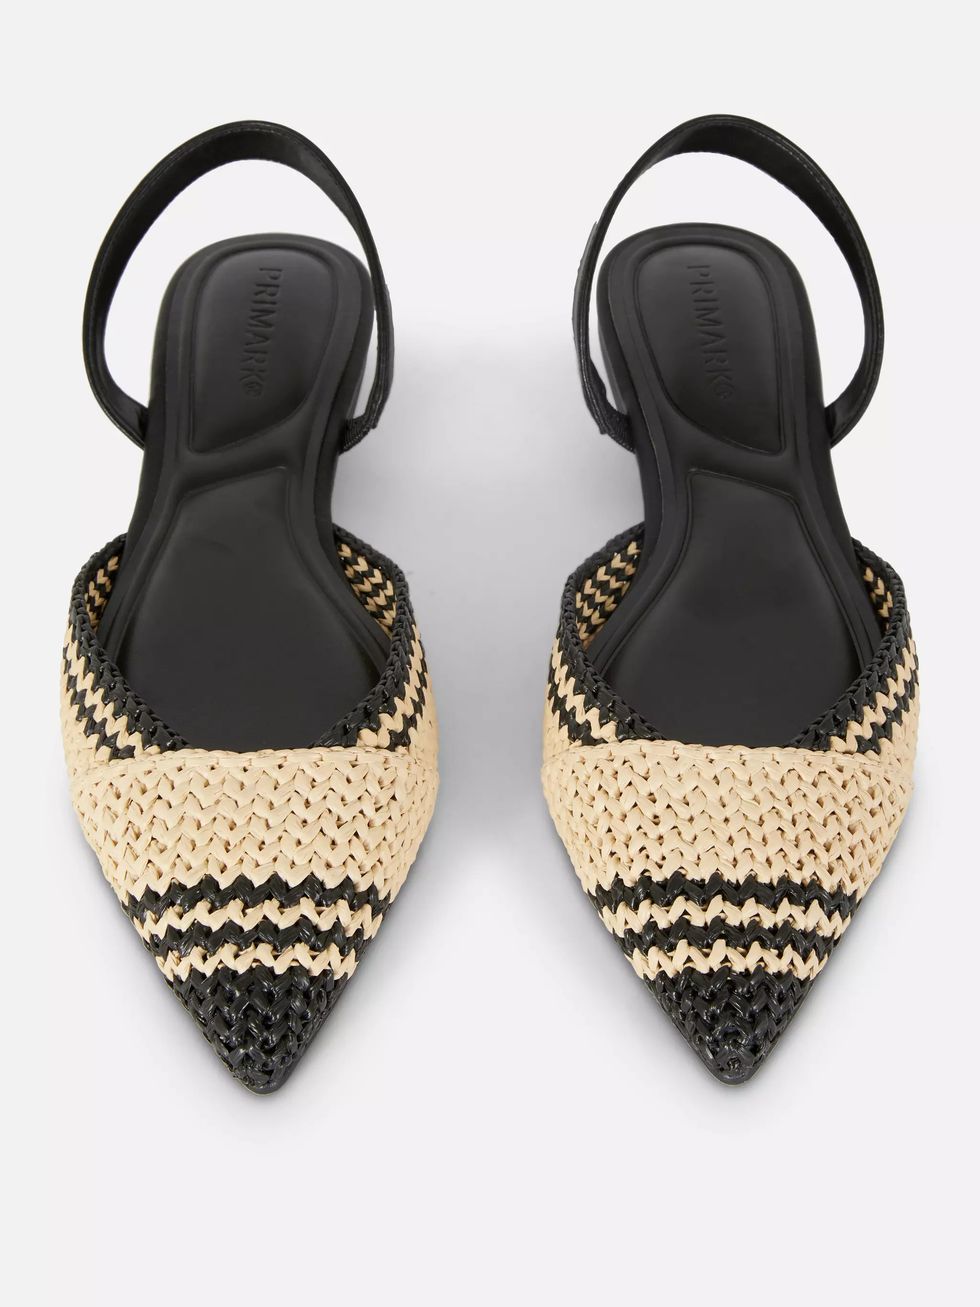 a pair of black and gold purses